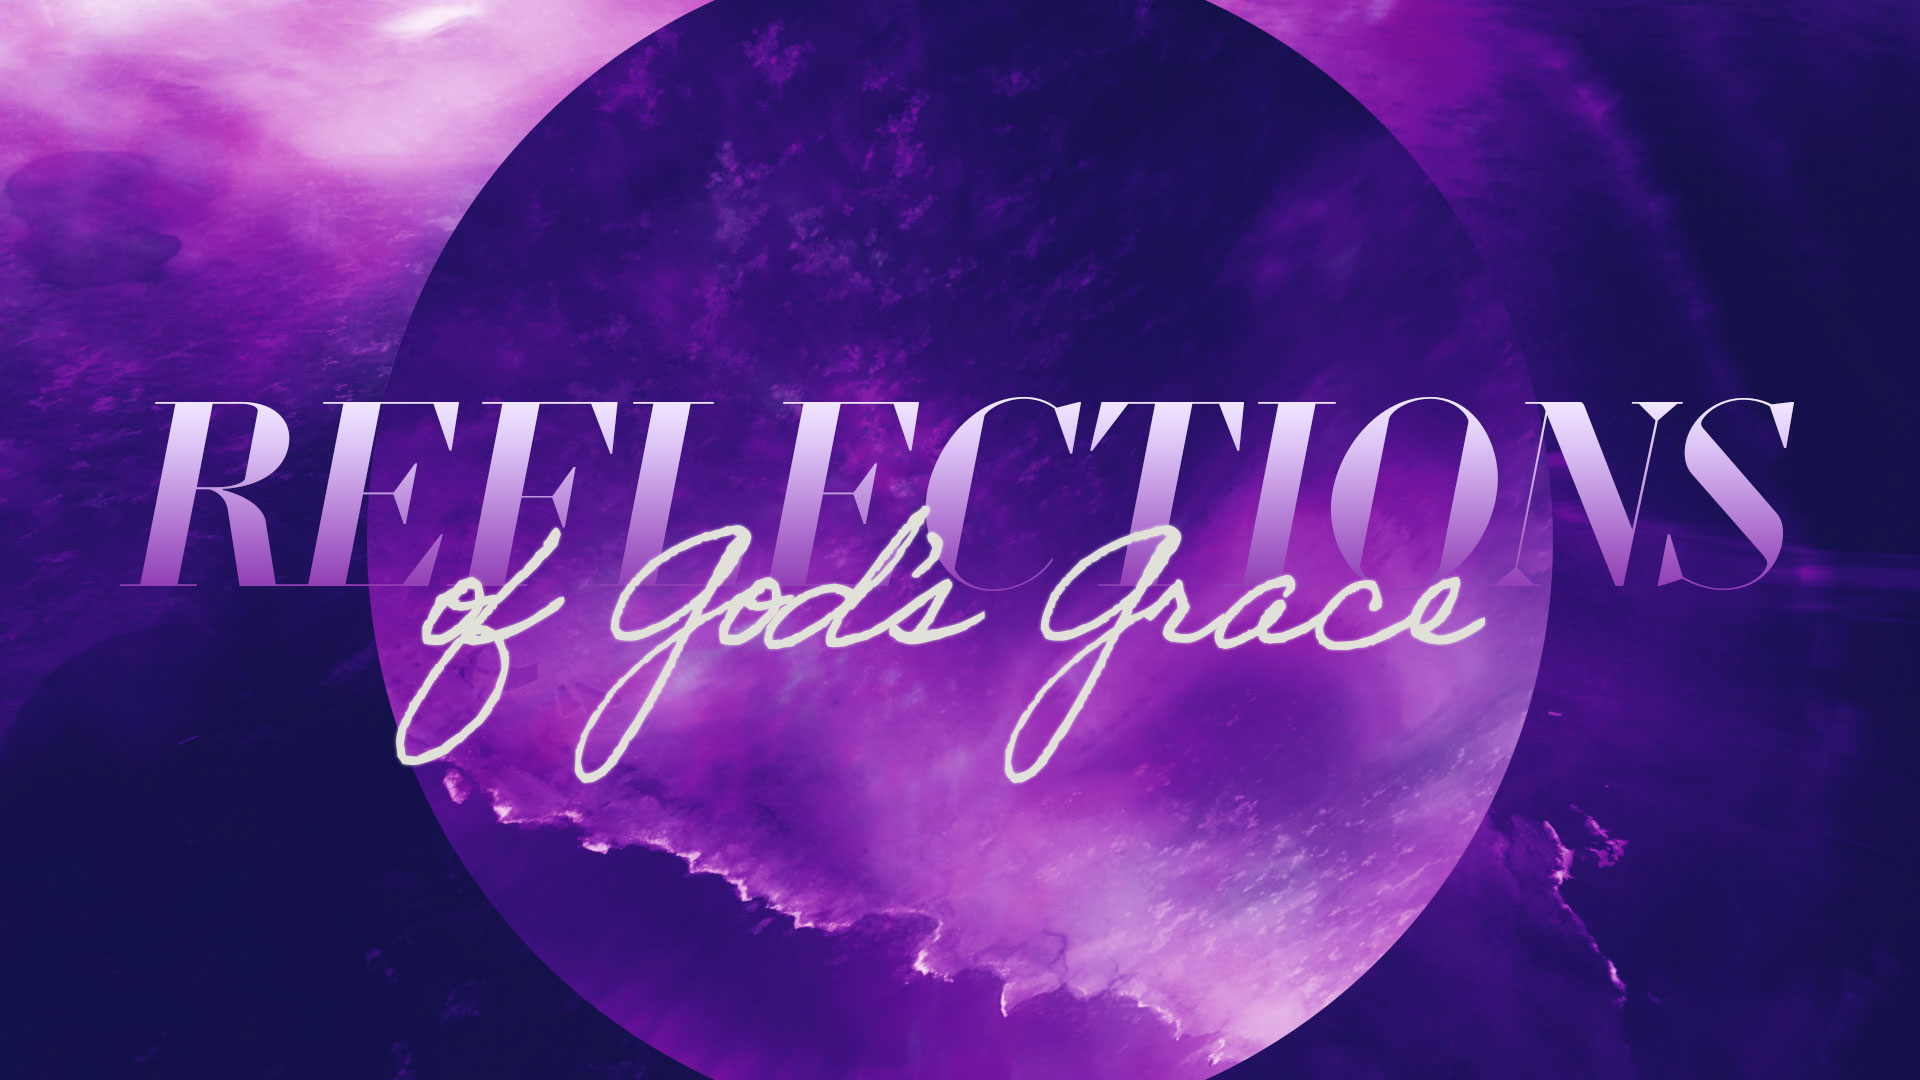 Reflections of God's Grace Series at LWCC